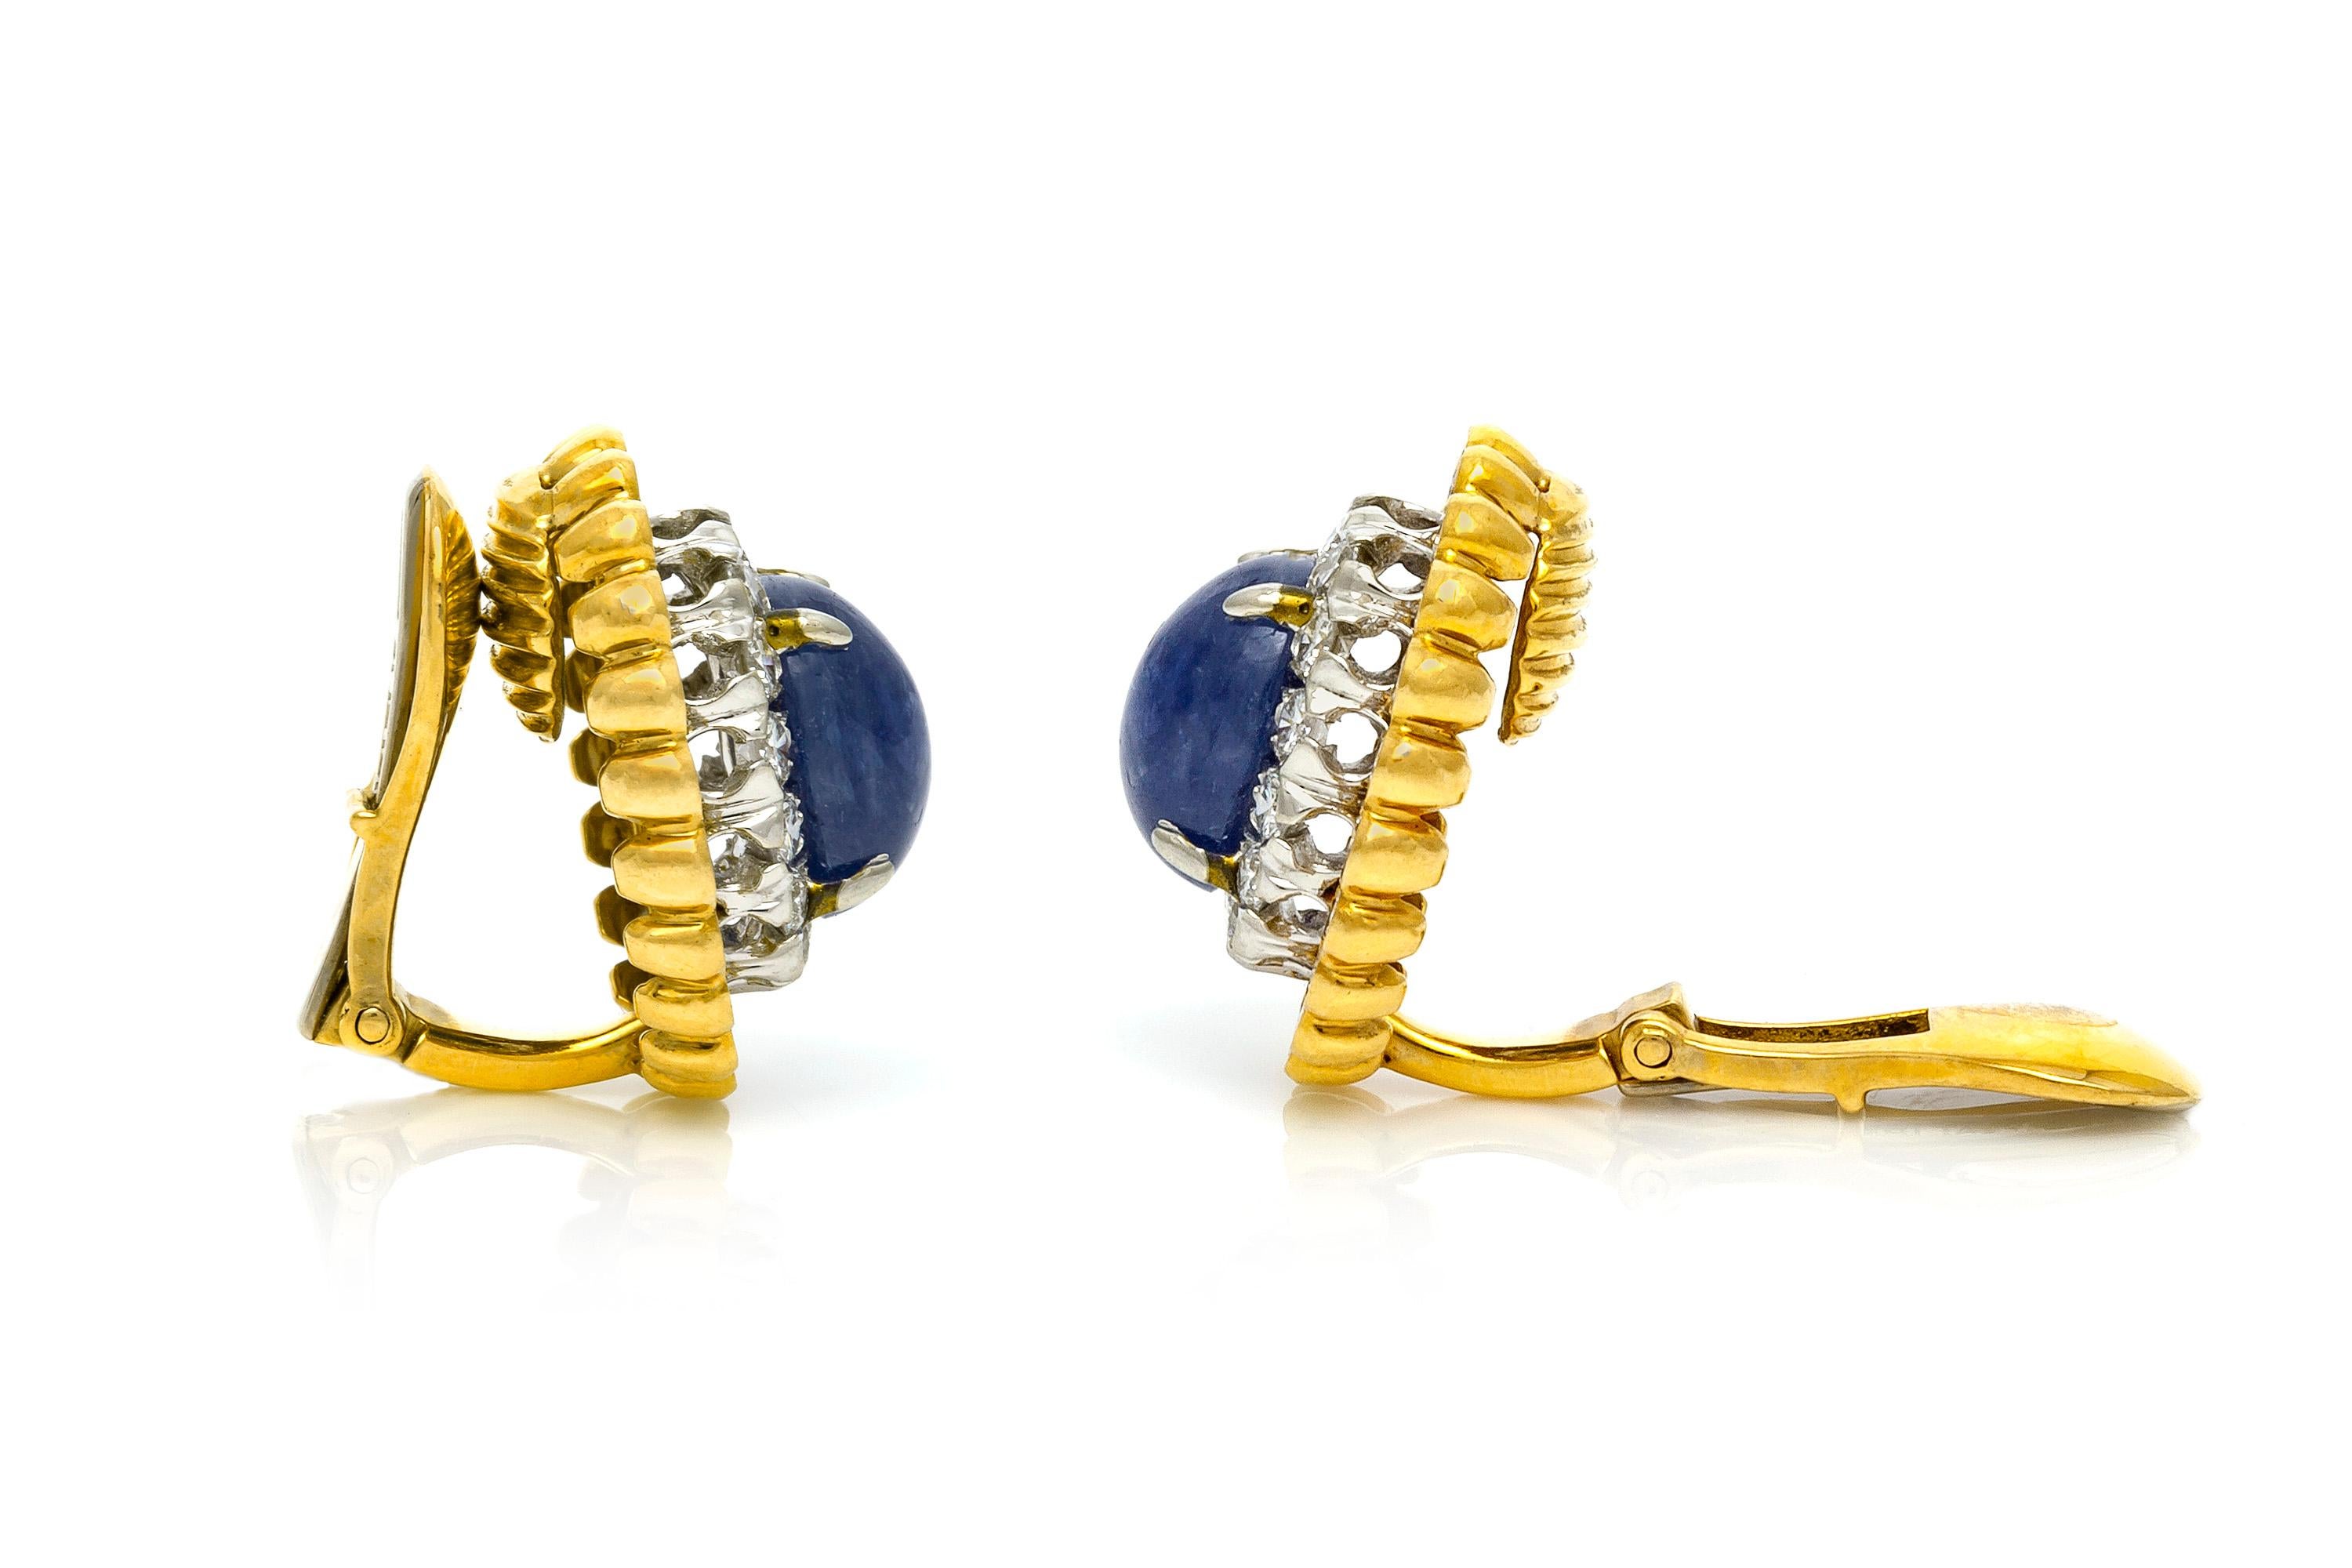 Finely crafted in 18k yellow and white gold with two Cabochon Sapphires weighing approximately a total of 10.00 carats.
The earrings feature round brilliant cut diamonds weighing approximately a total of 6.00 carats.
Signed by David Webb
Clip-on